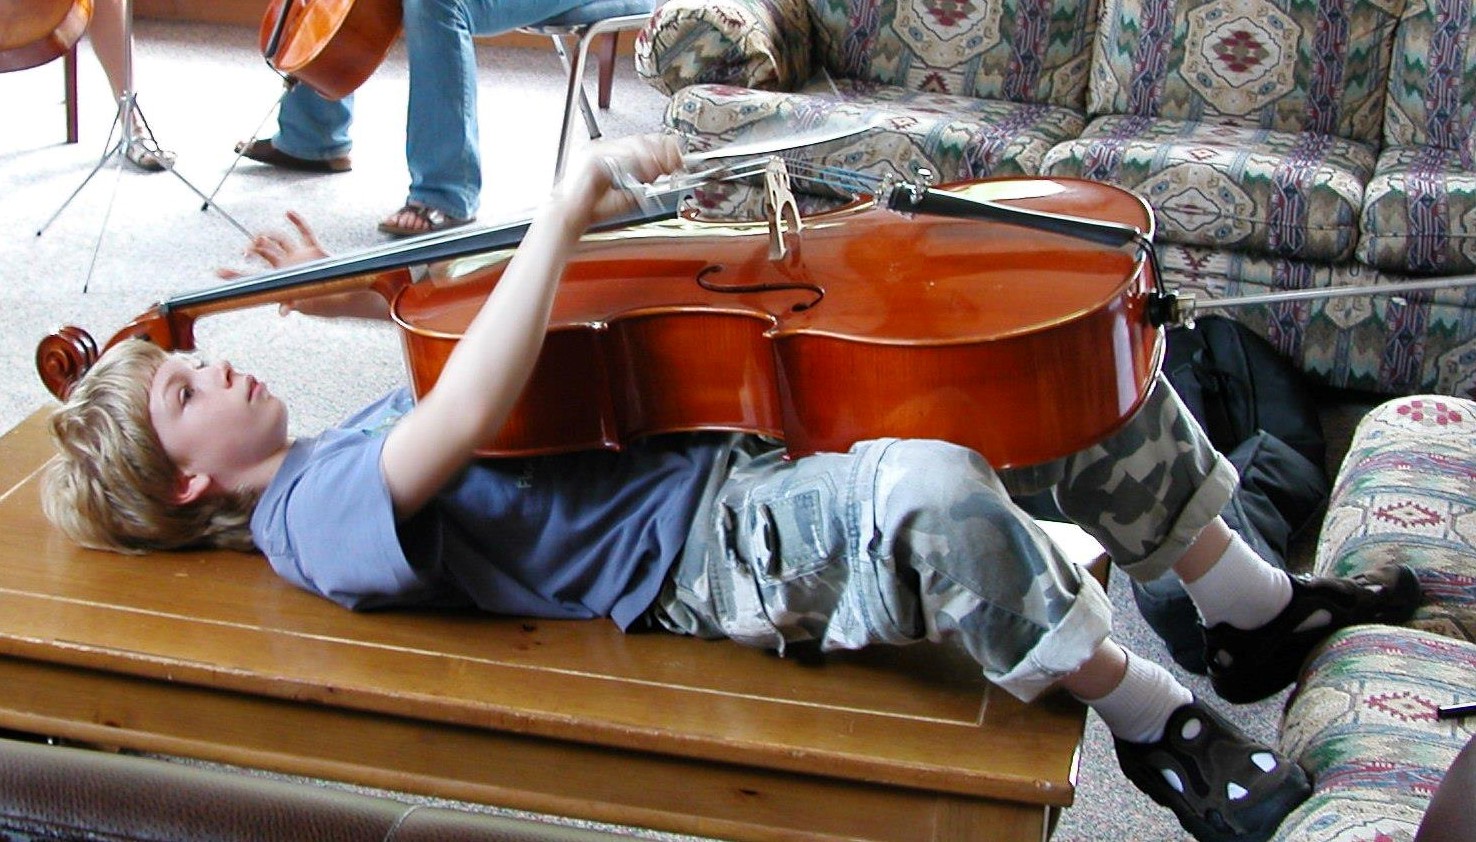 Victor cello lying down